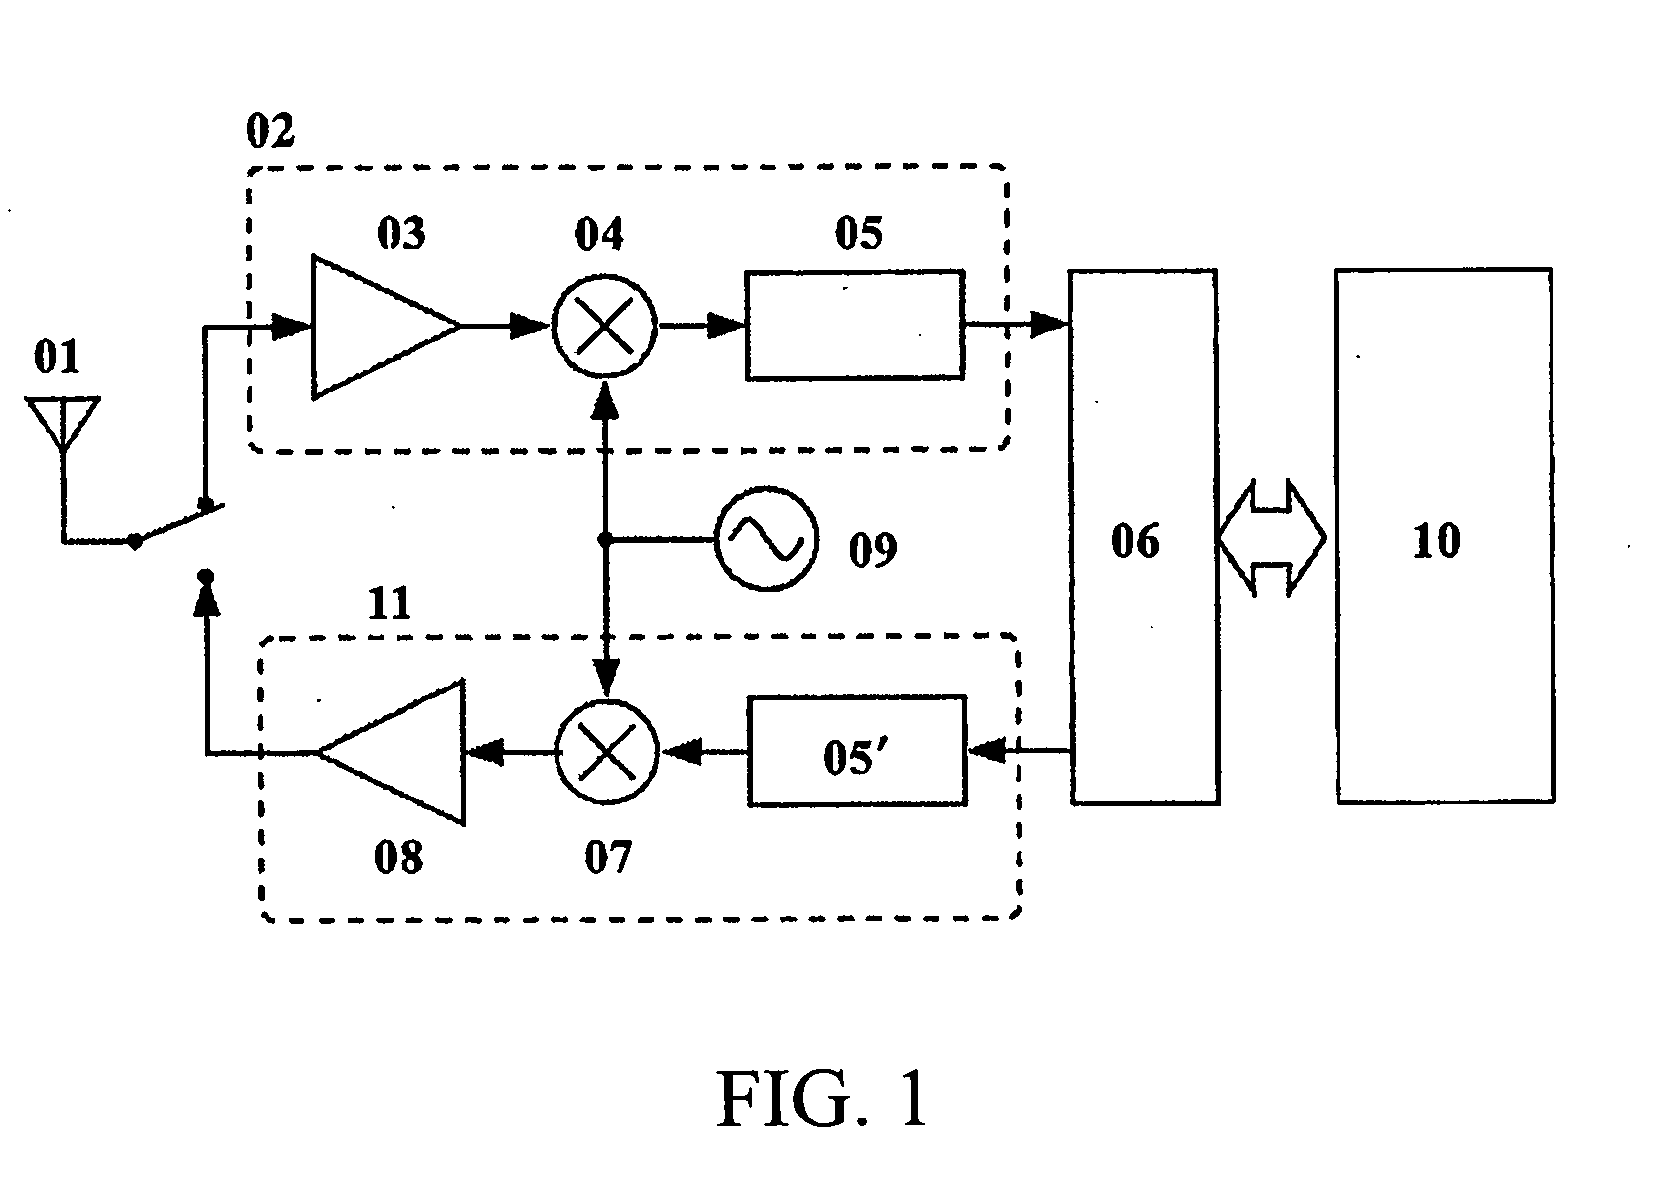 Ultra broad-band low noise amplifier utilizing dual feedback technique